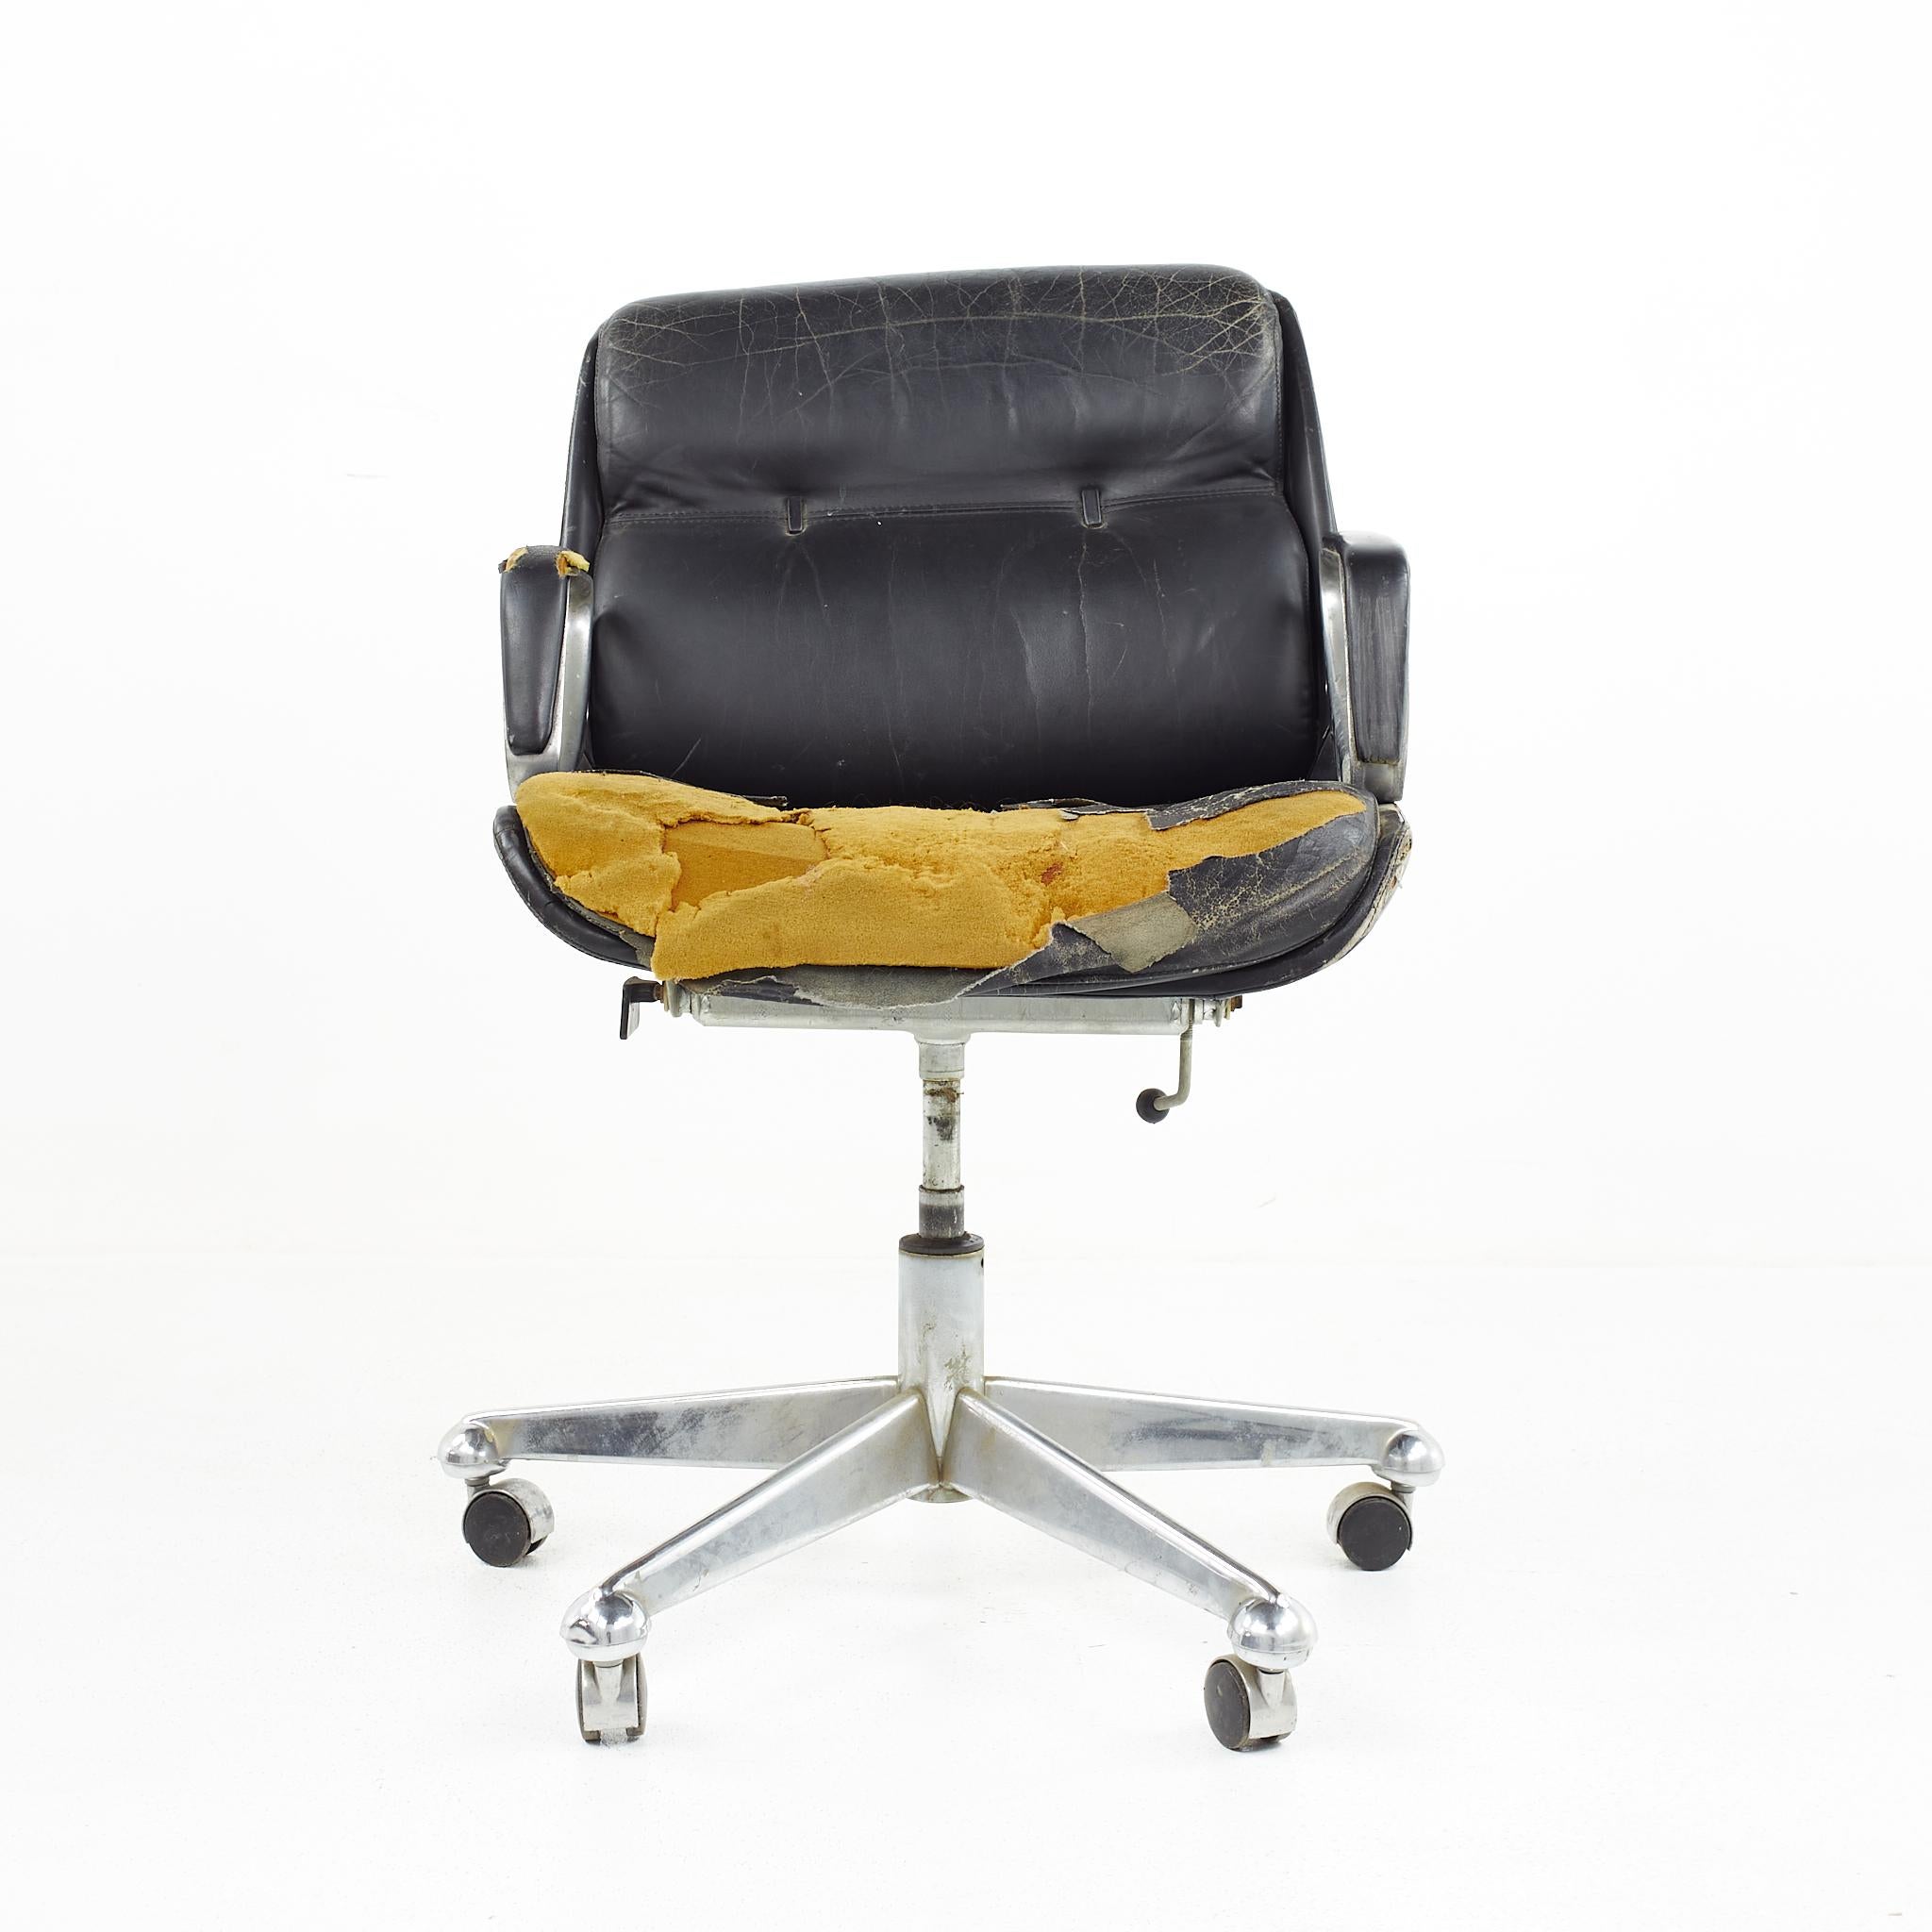 Jean Gillon mid century desk chair

The chair measures: 23 wide x 26.25 deep x 35 high, with a seat height of 22.25 inches and arm height/chair clearance of 27.5 inches

Ready for new upholstery. This service is available for an additional